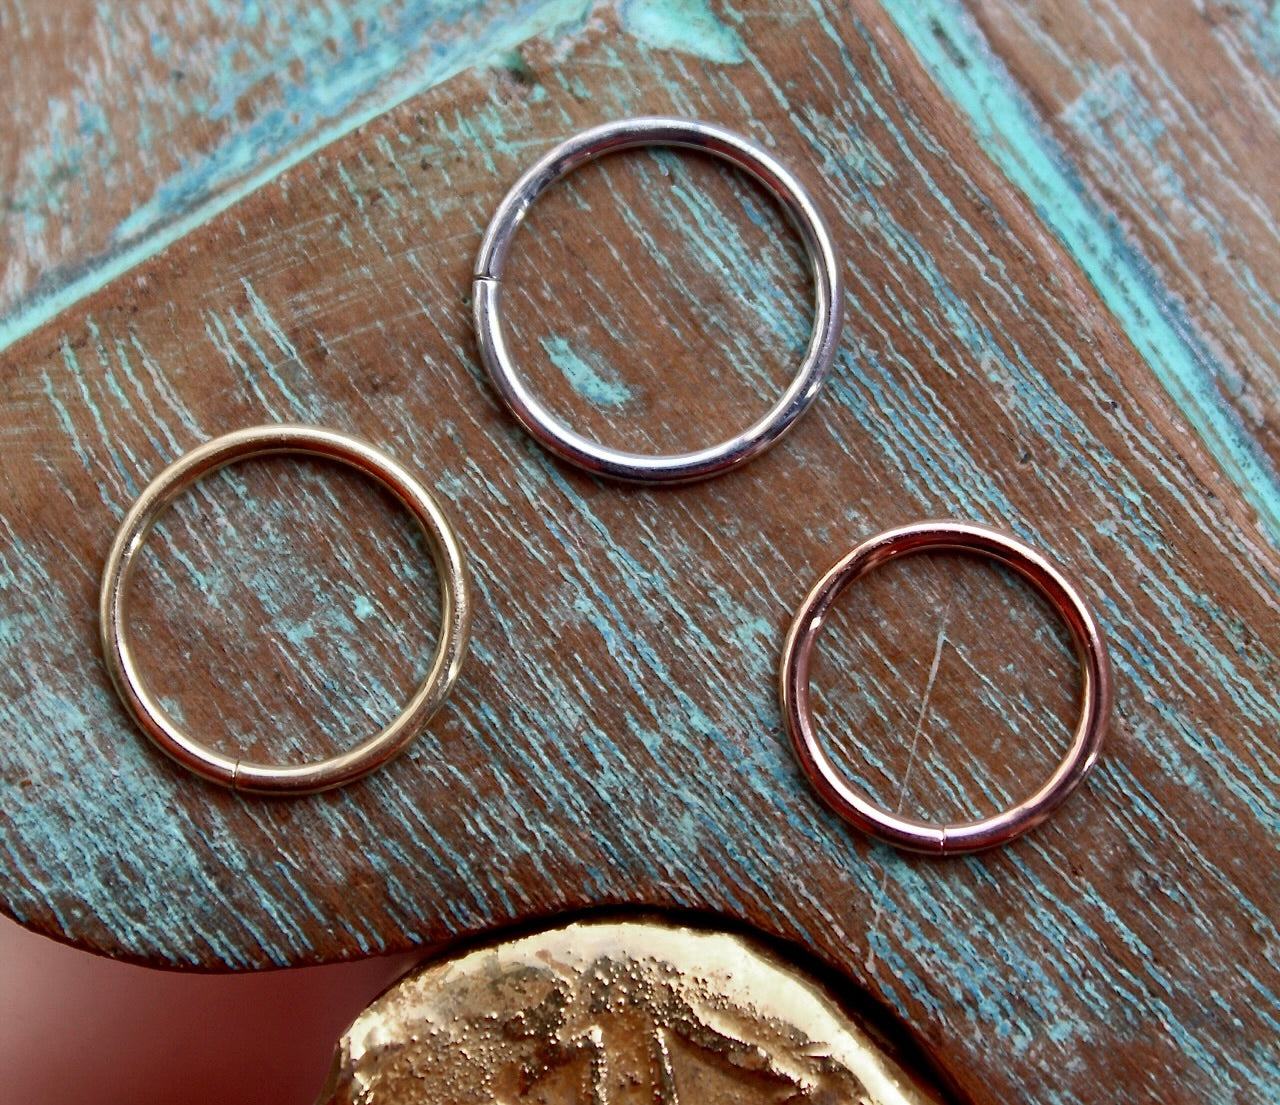 
                  
                    BVLA's "Seam Ring" shown from left to right in 14k Yellow gold, 14k White gold and 14k Rose gold. shown on a background featuring a piece of wood with blue paint on top and a small golden piece on the bottom of the photo
                  
                